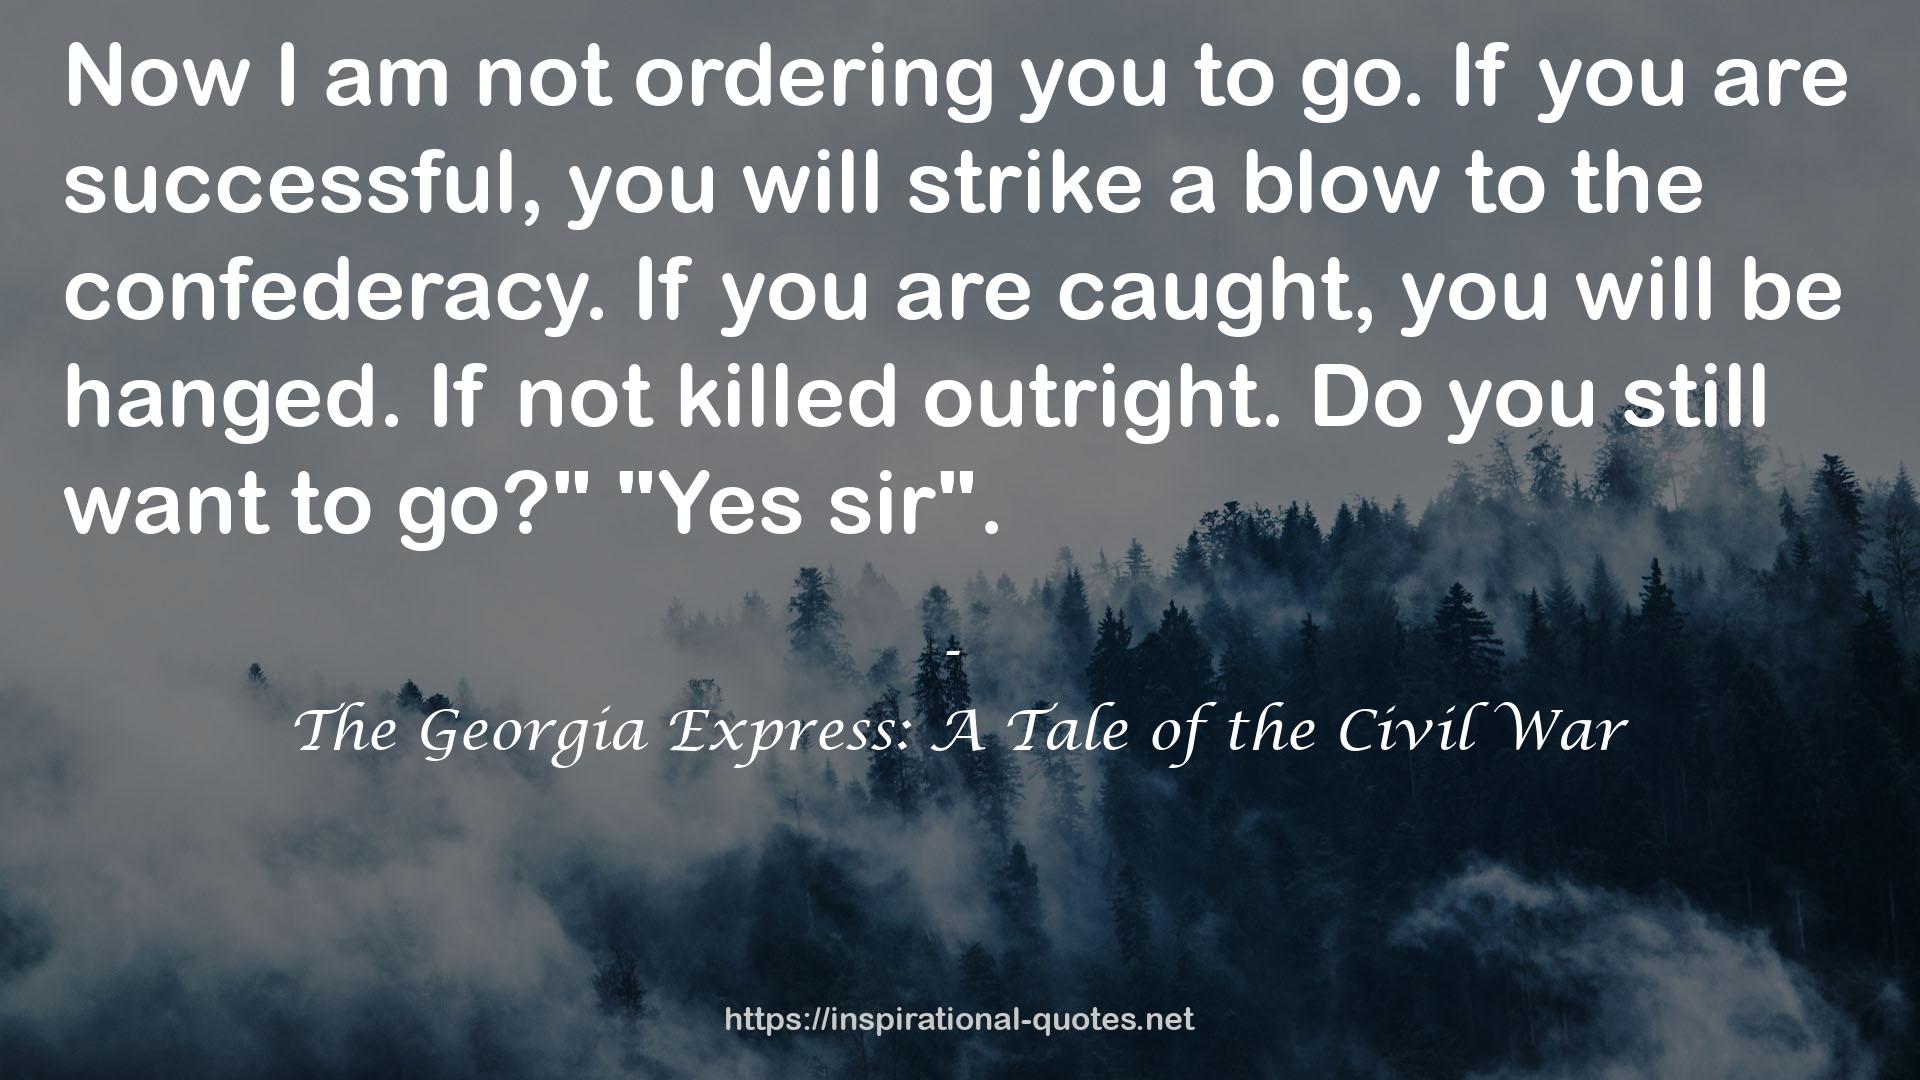 The Georgia Express: A Tale of the Civil War QUOTES